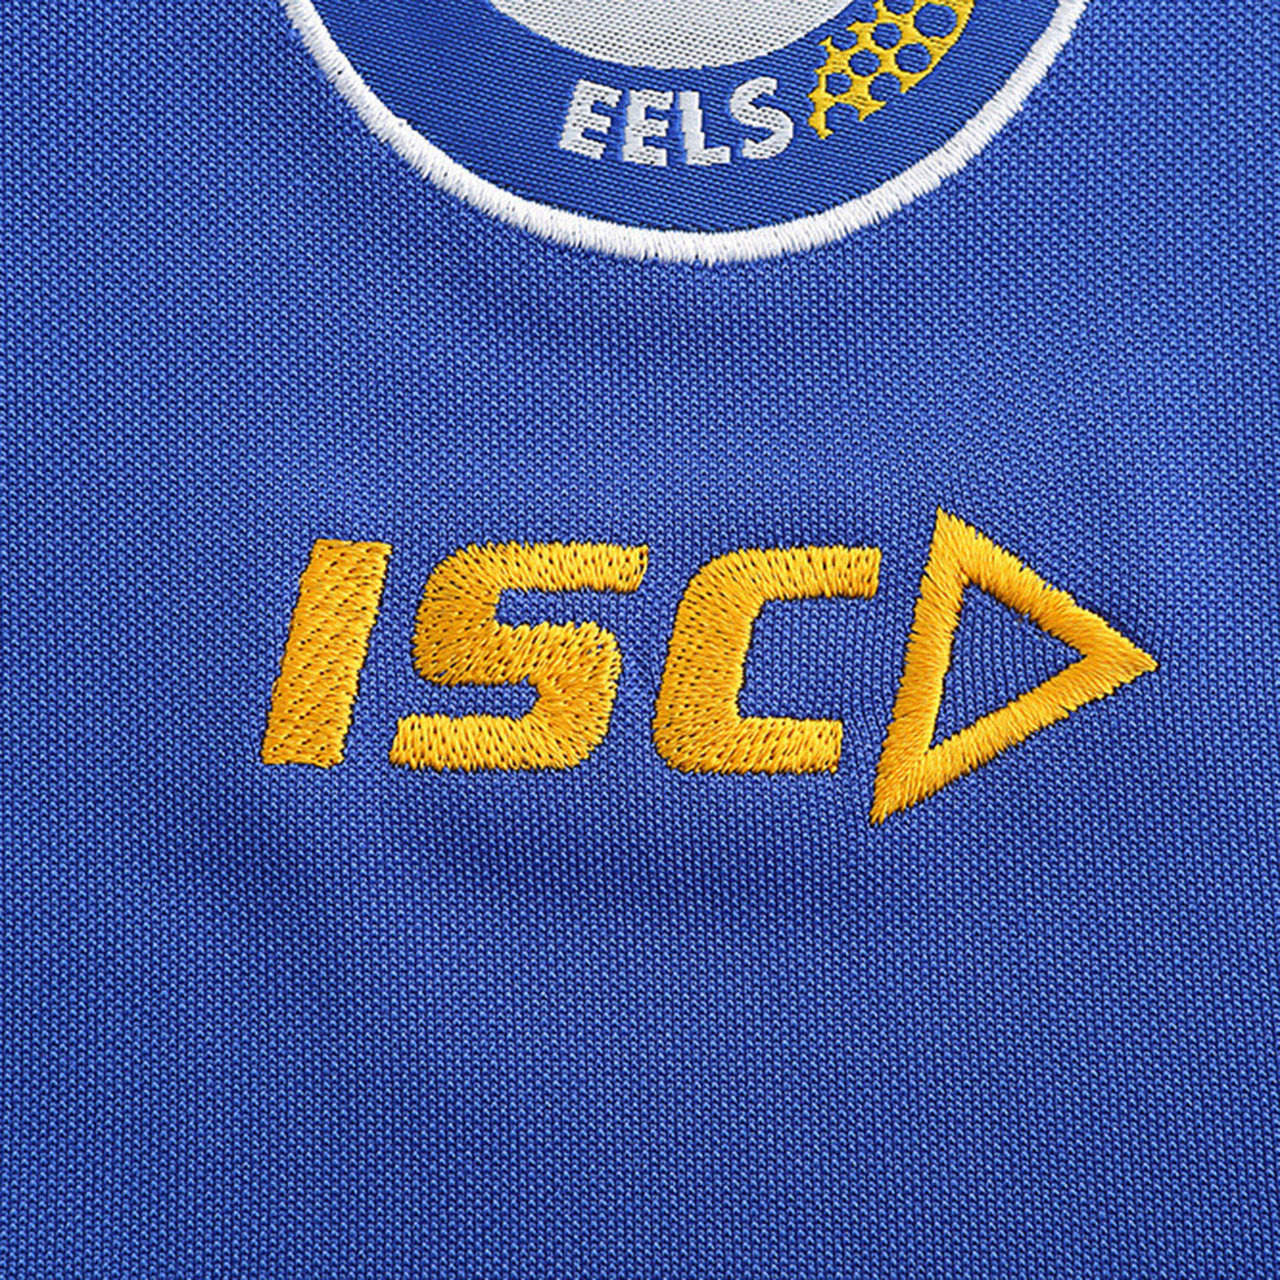 Details about   Parramatta Eels NRL ISC Players Media Polo Shirt Sizes S-5XL T8 